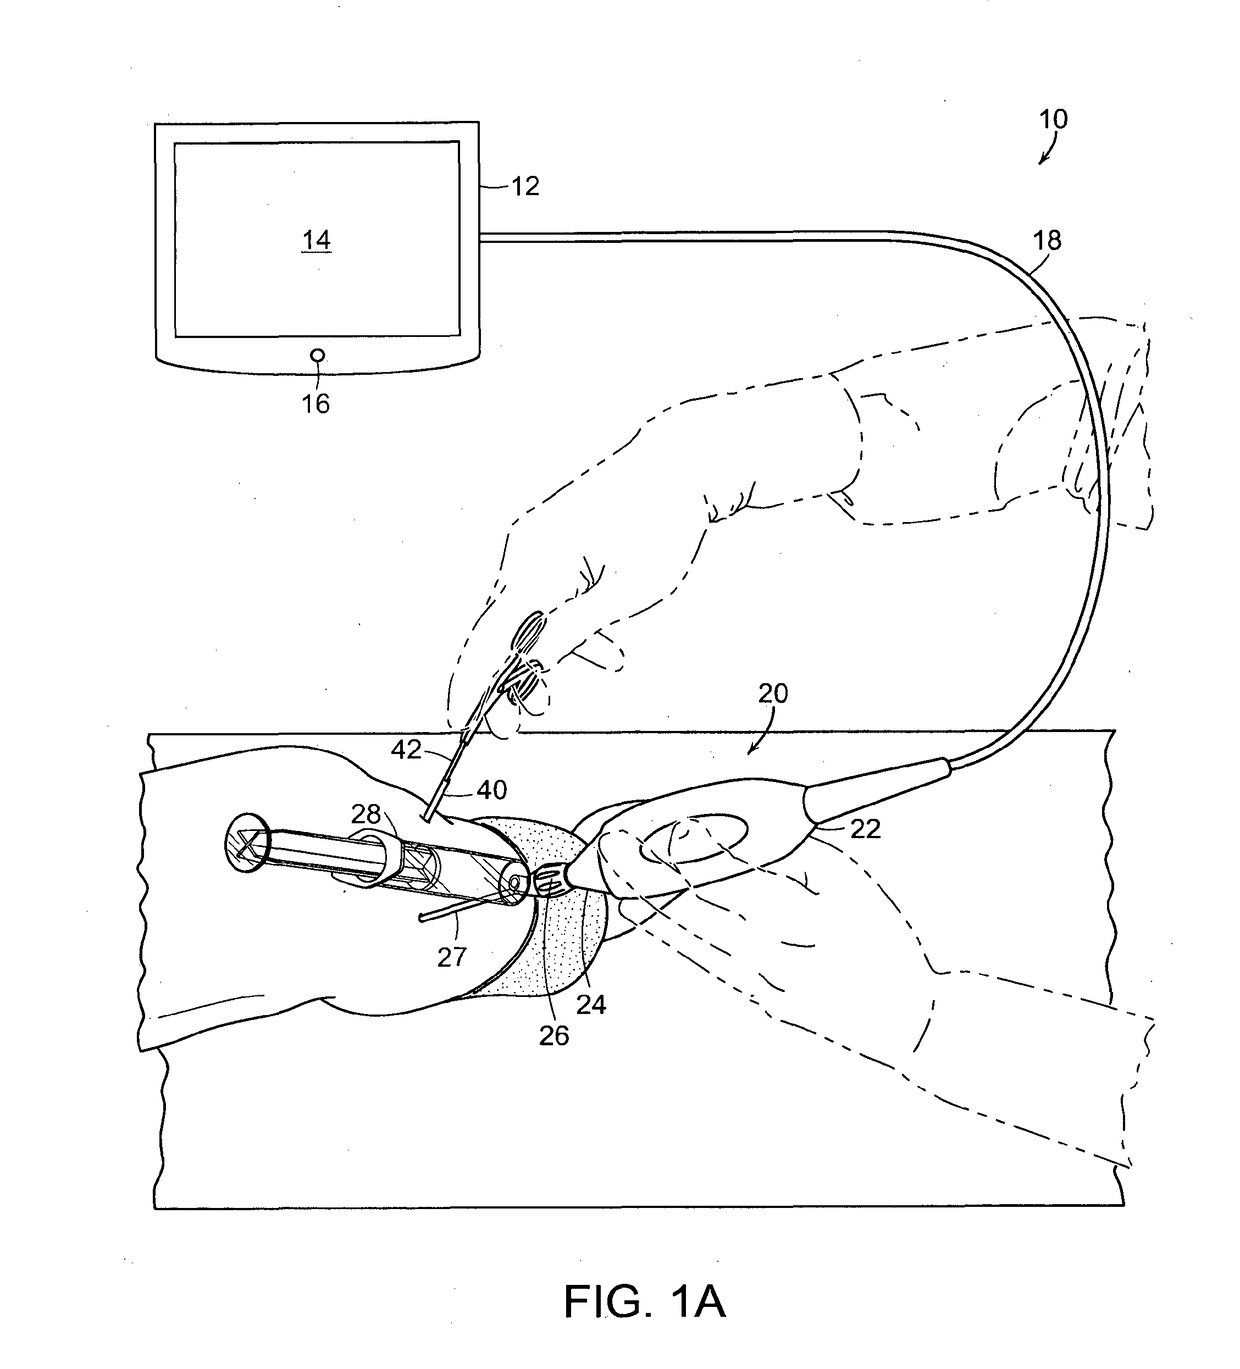 Devices and methods for minimally invasive surgery